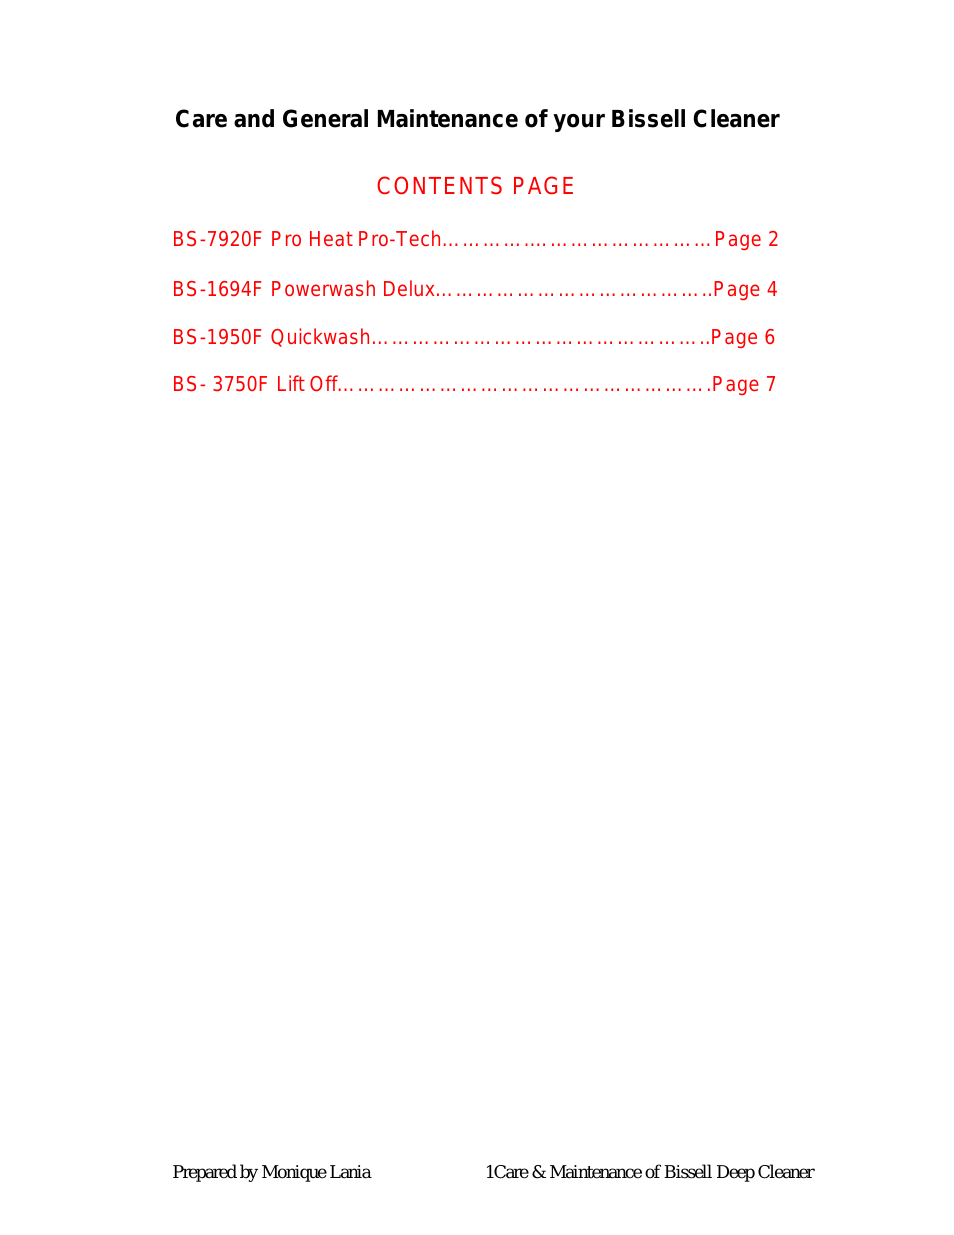 BS-7920F (Page 1)